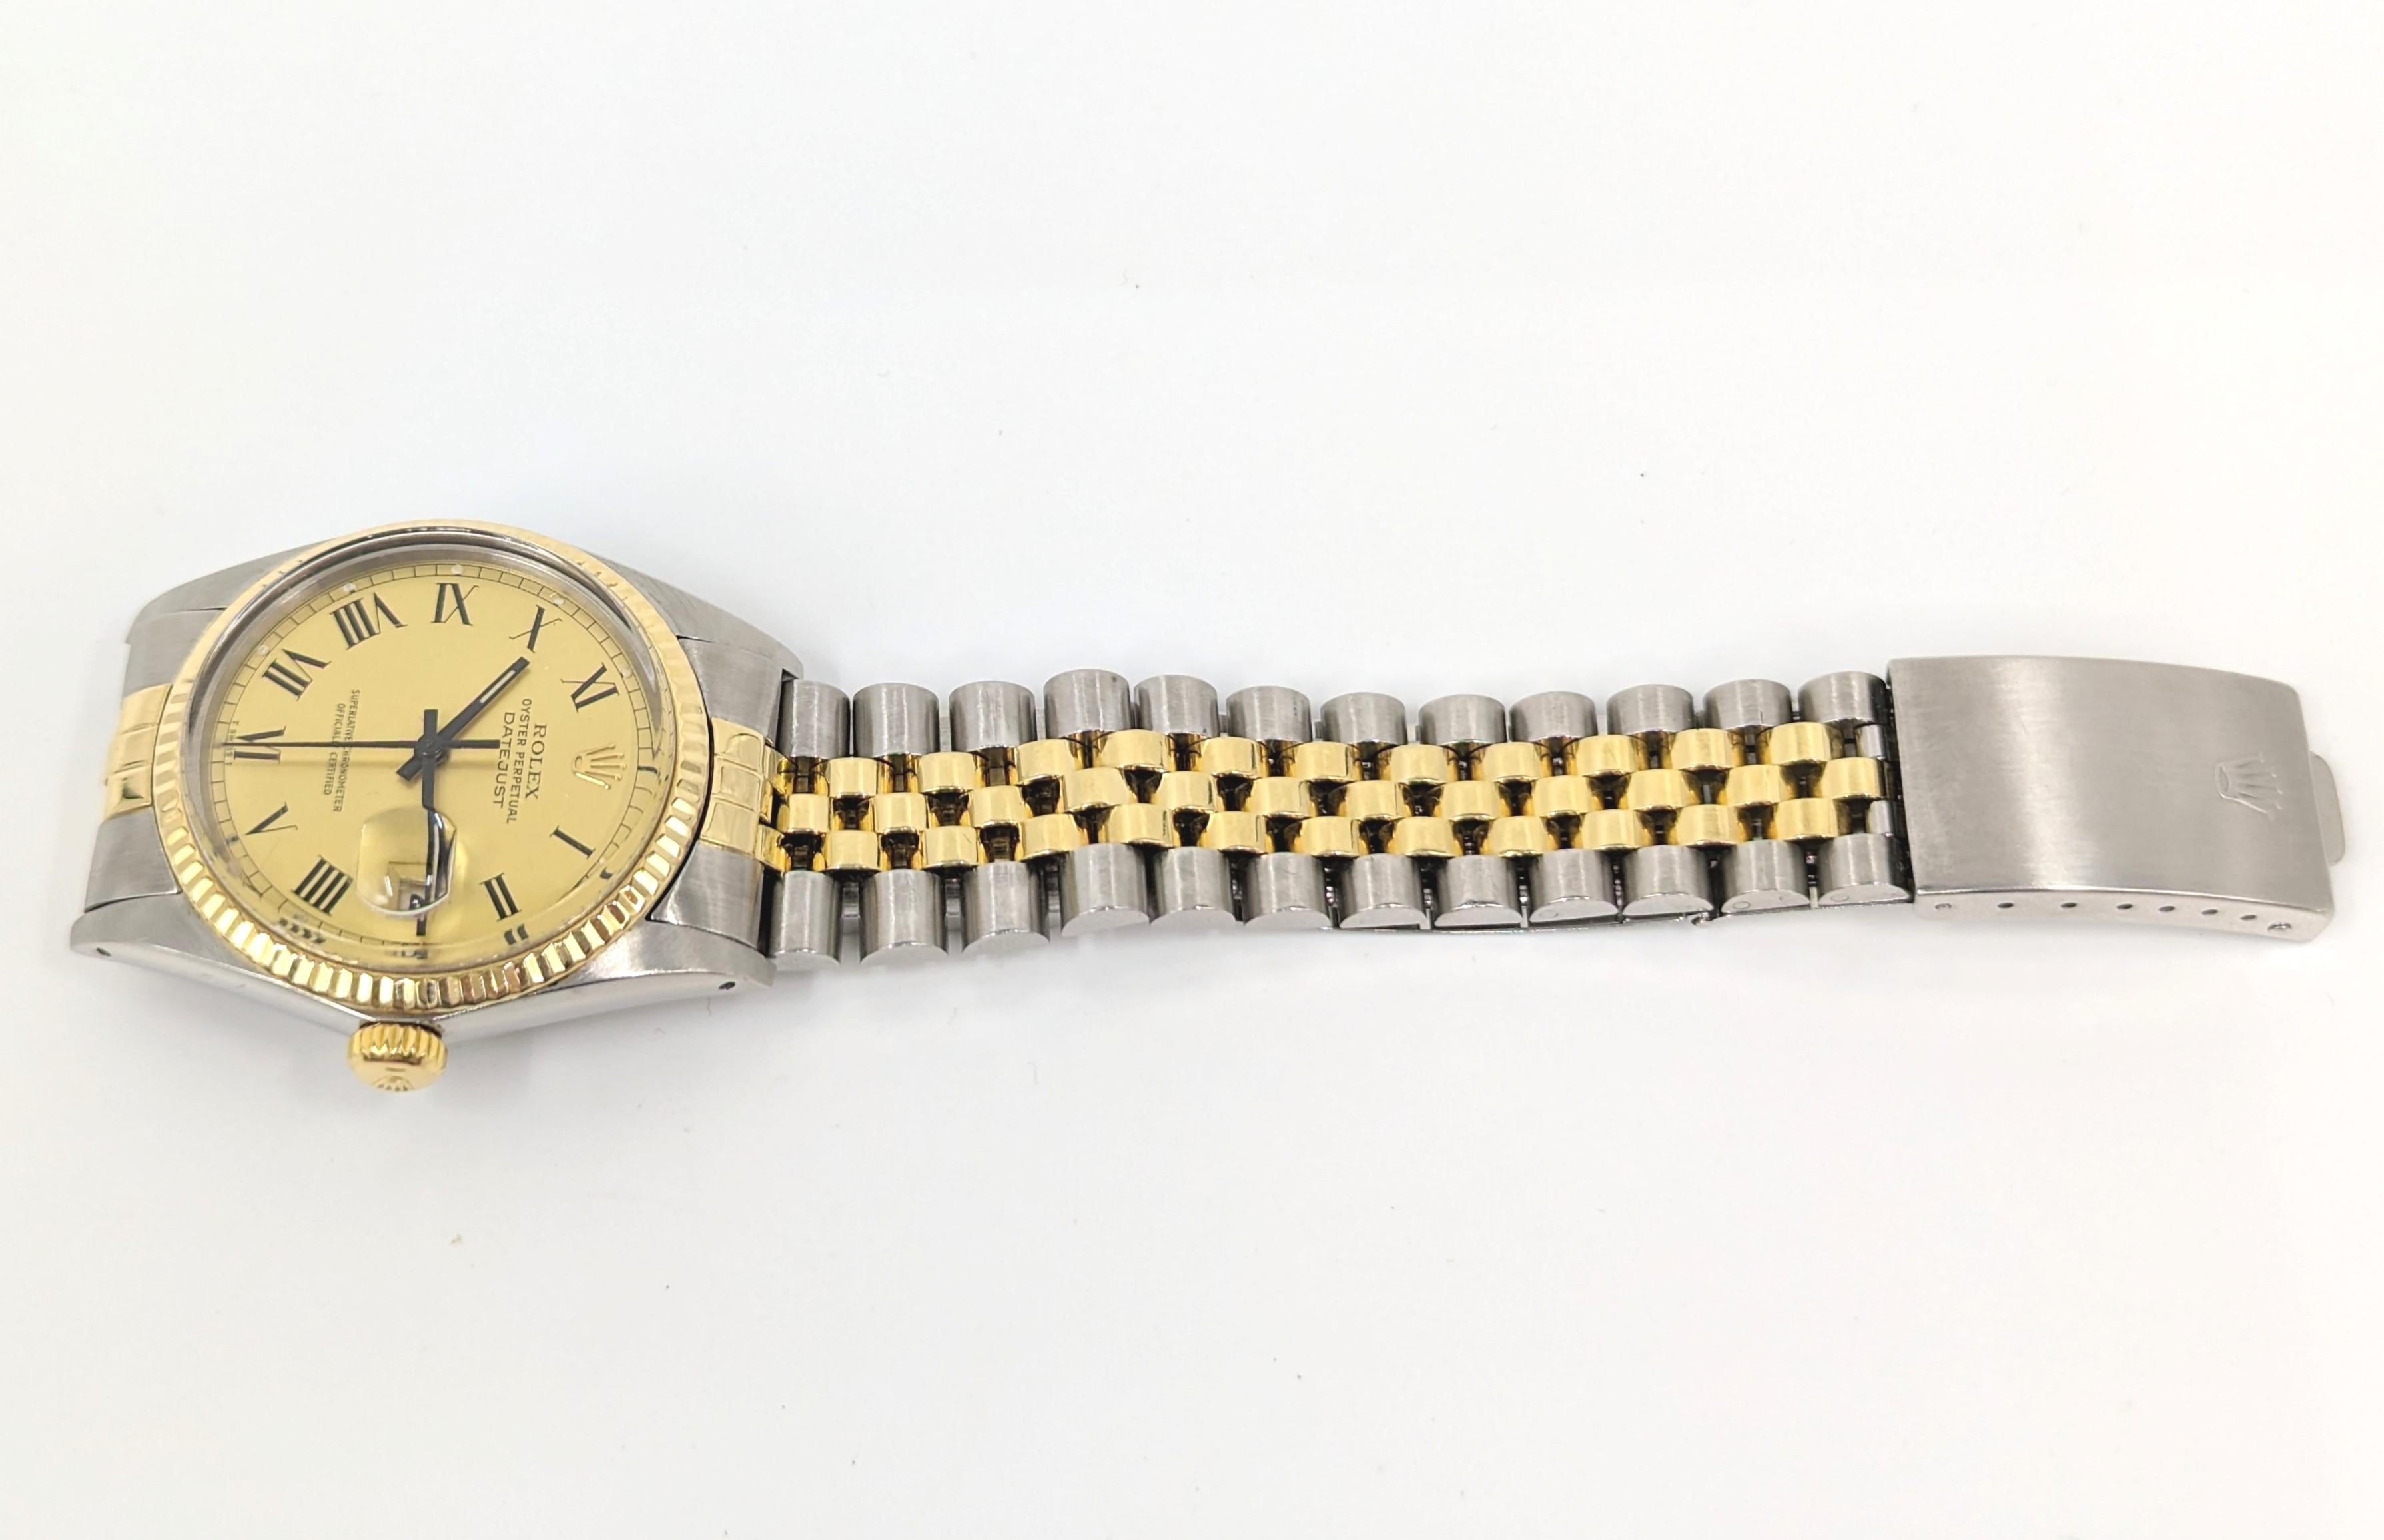 Rolex Oyster Perpetual Datejust 18k/SS YG 2tone Watch Collectible Buckley 16013 en vente 4